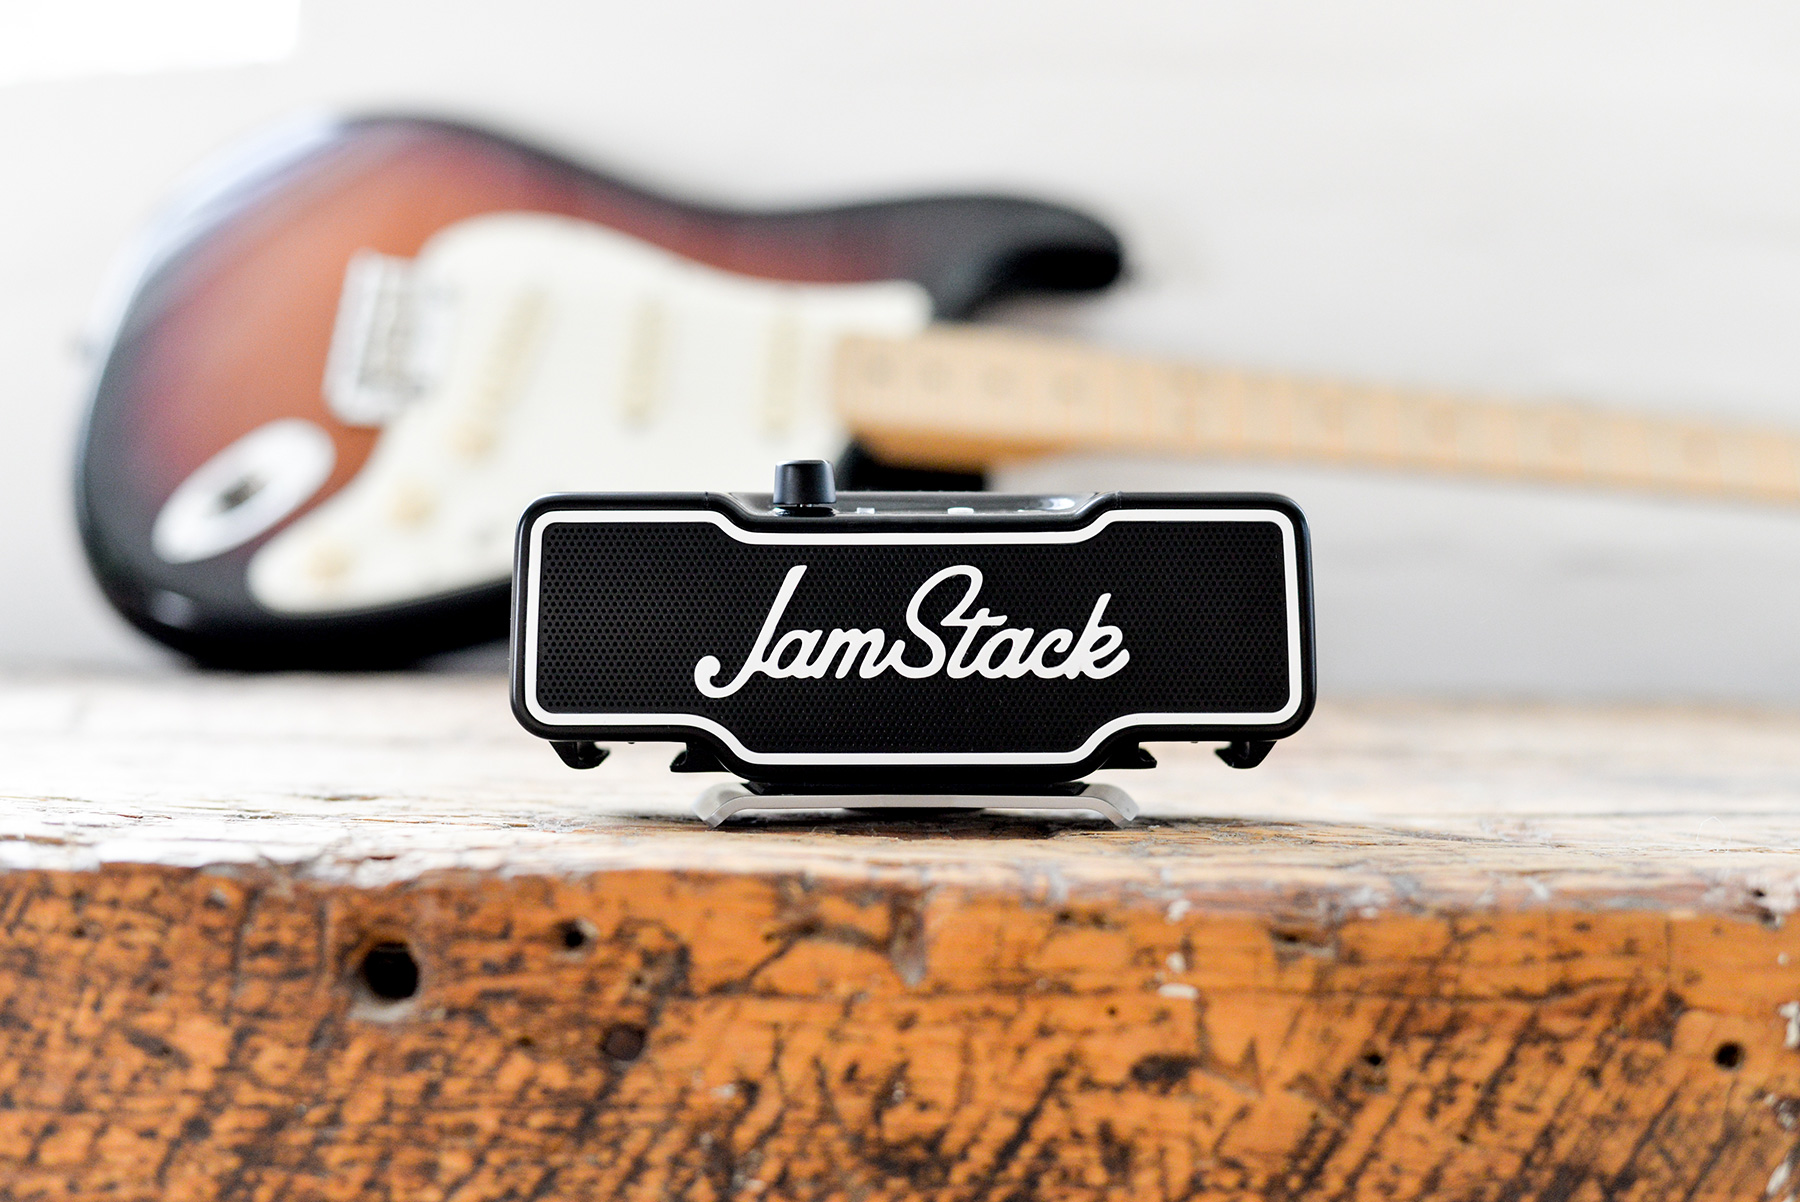 Canadian Inventor Has Revolutionized Busking With the JamStack